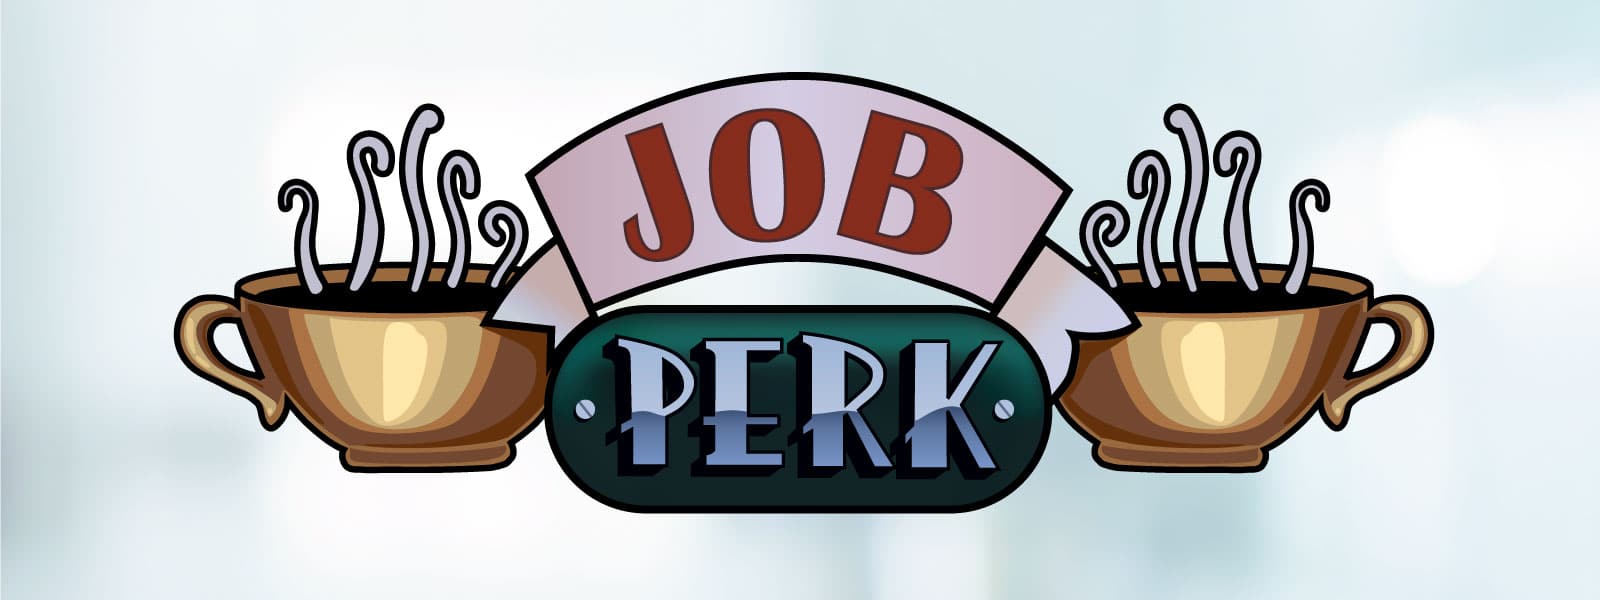 Job perks graphic on PSA Insurance & Financial Services' website